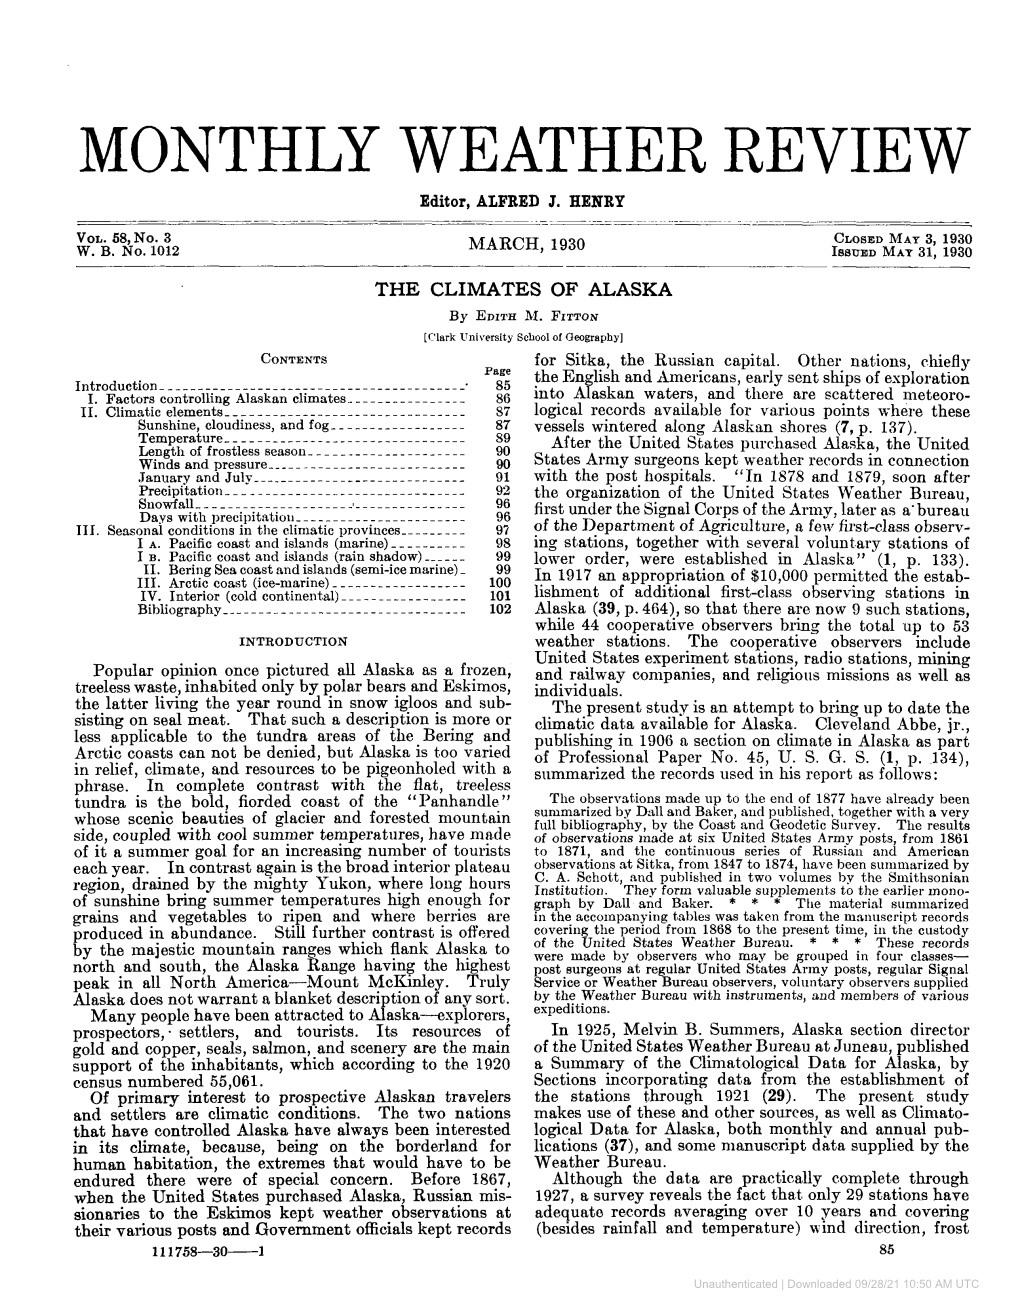 MONTHLY WEATHER REVIEW Editor, ALFRED J